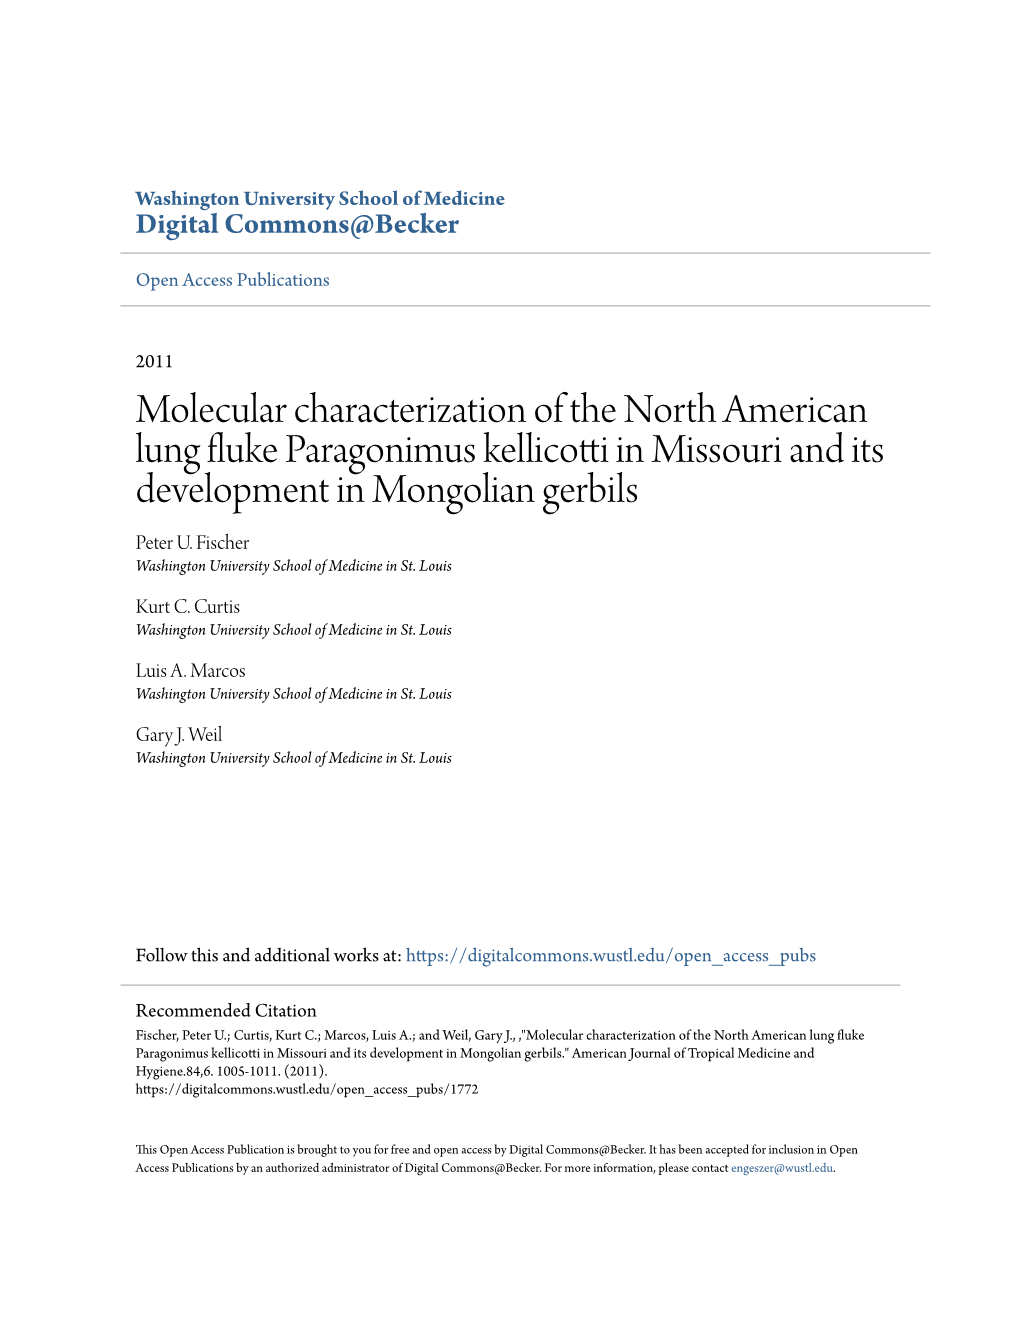 Molecular Characterization of the North American Lung Fluke Paragonimus Kellicotti in Missouri and Its Development in Mongolian Gerbils Peter U